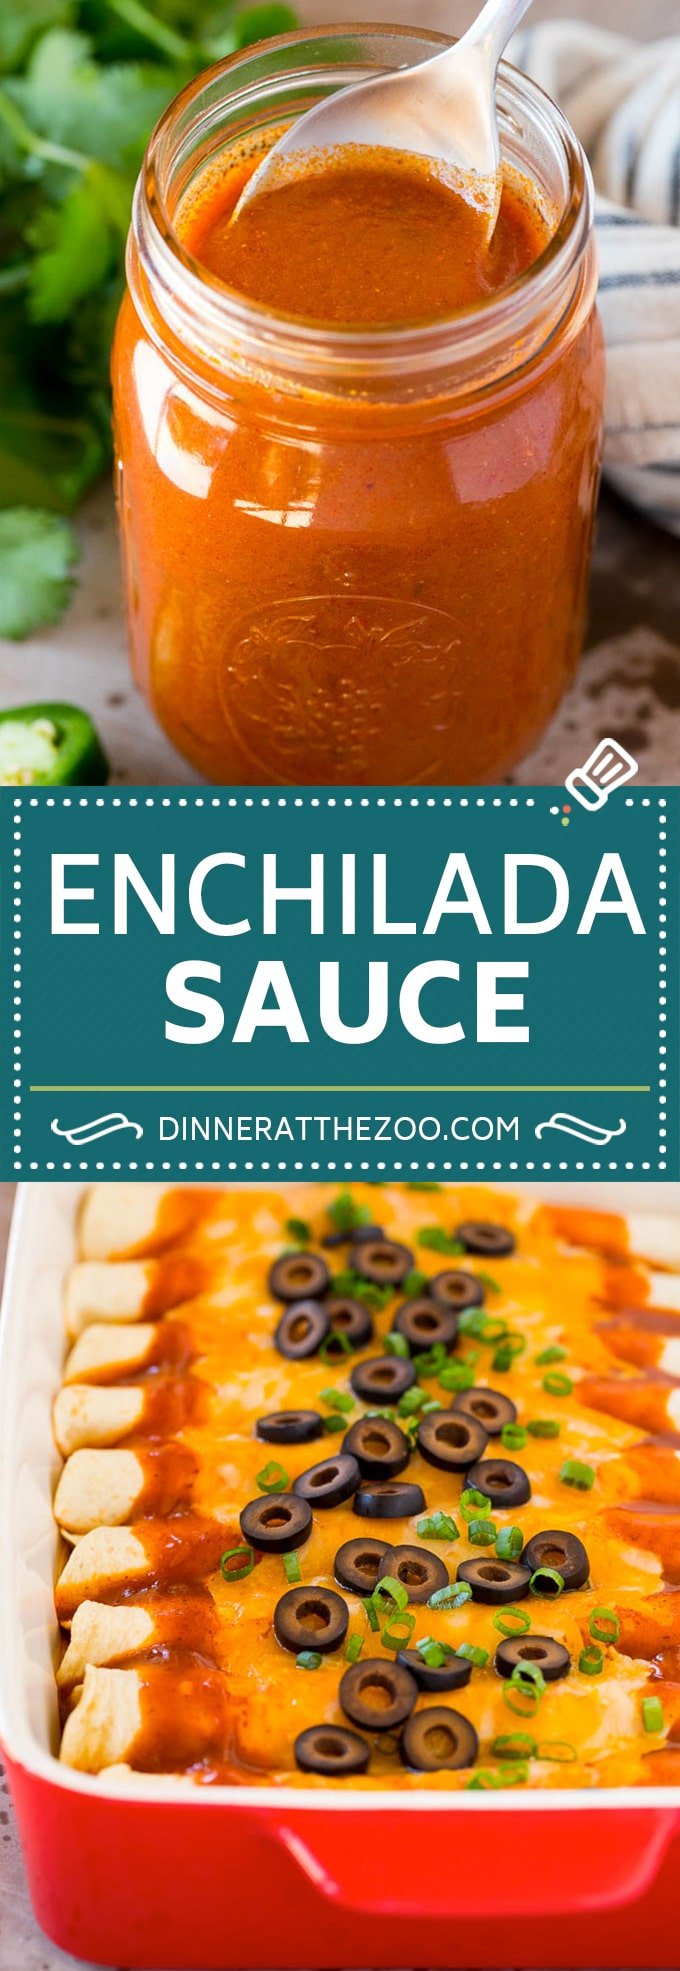 This homemade enchilada sauce is a blend of chili powder, chicken broth, seasonings and tomato, all simmered together to create a rich and hearty sauce.